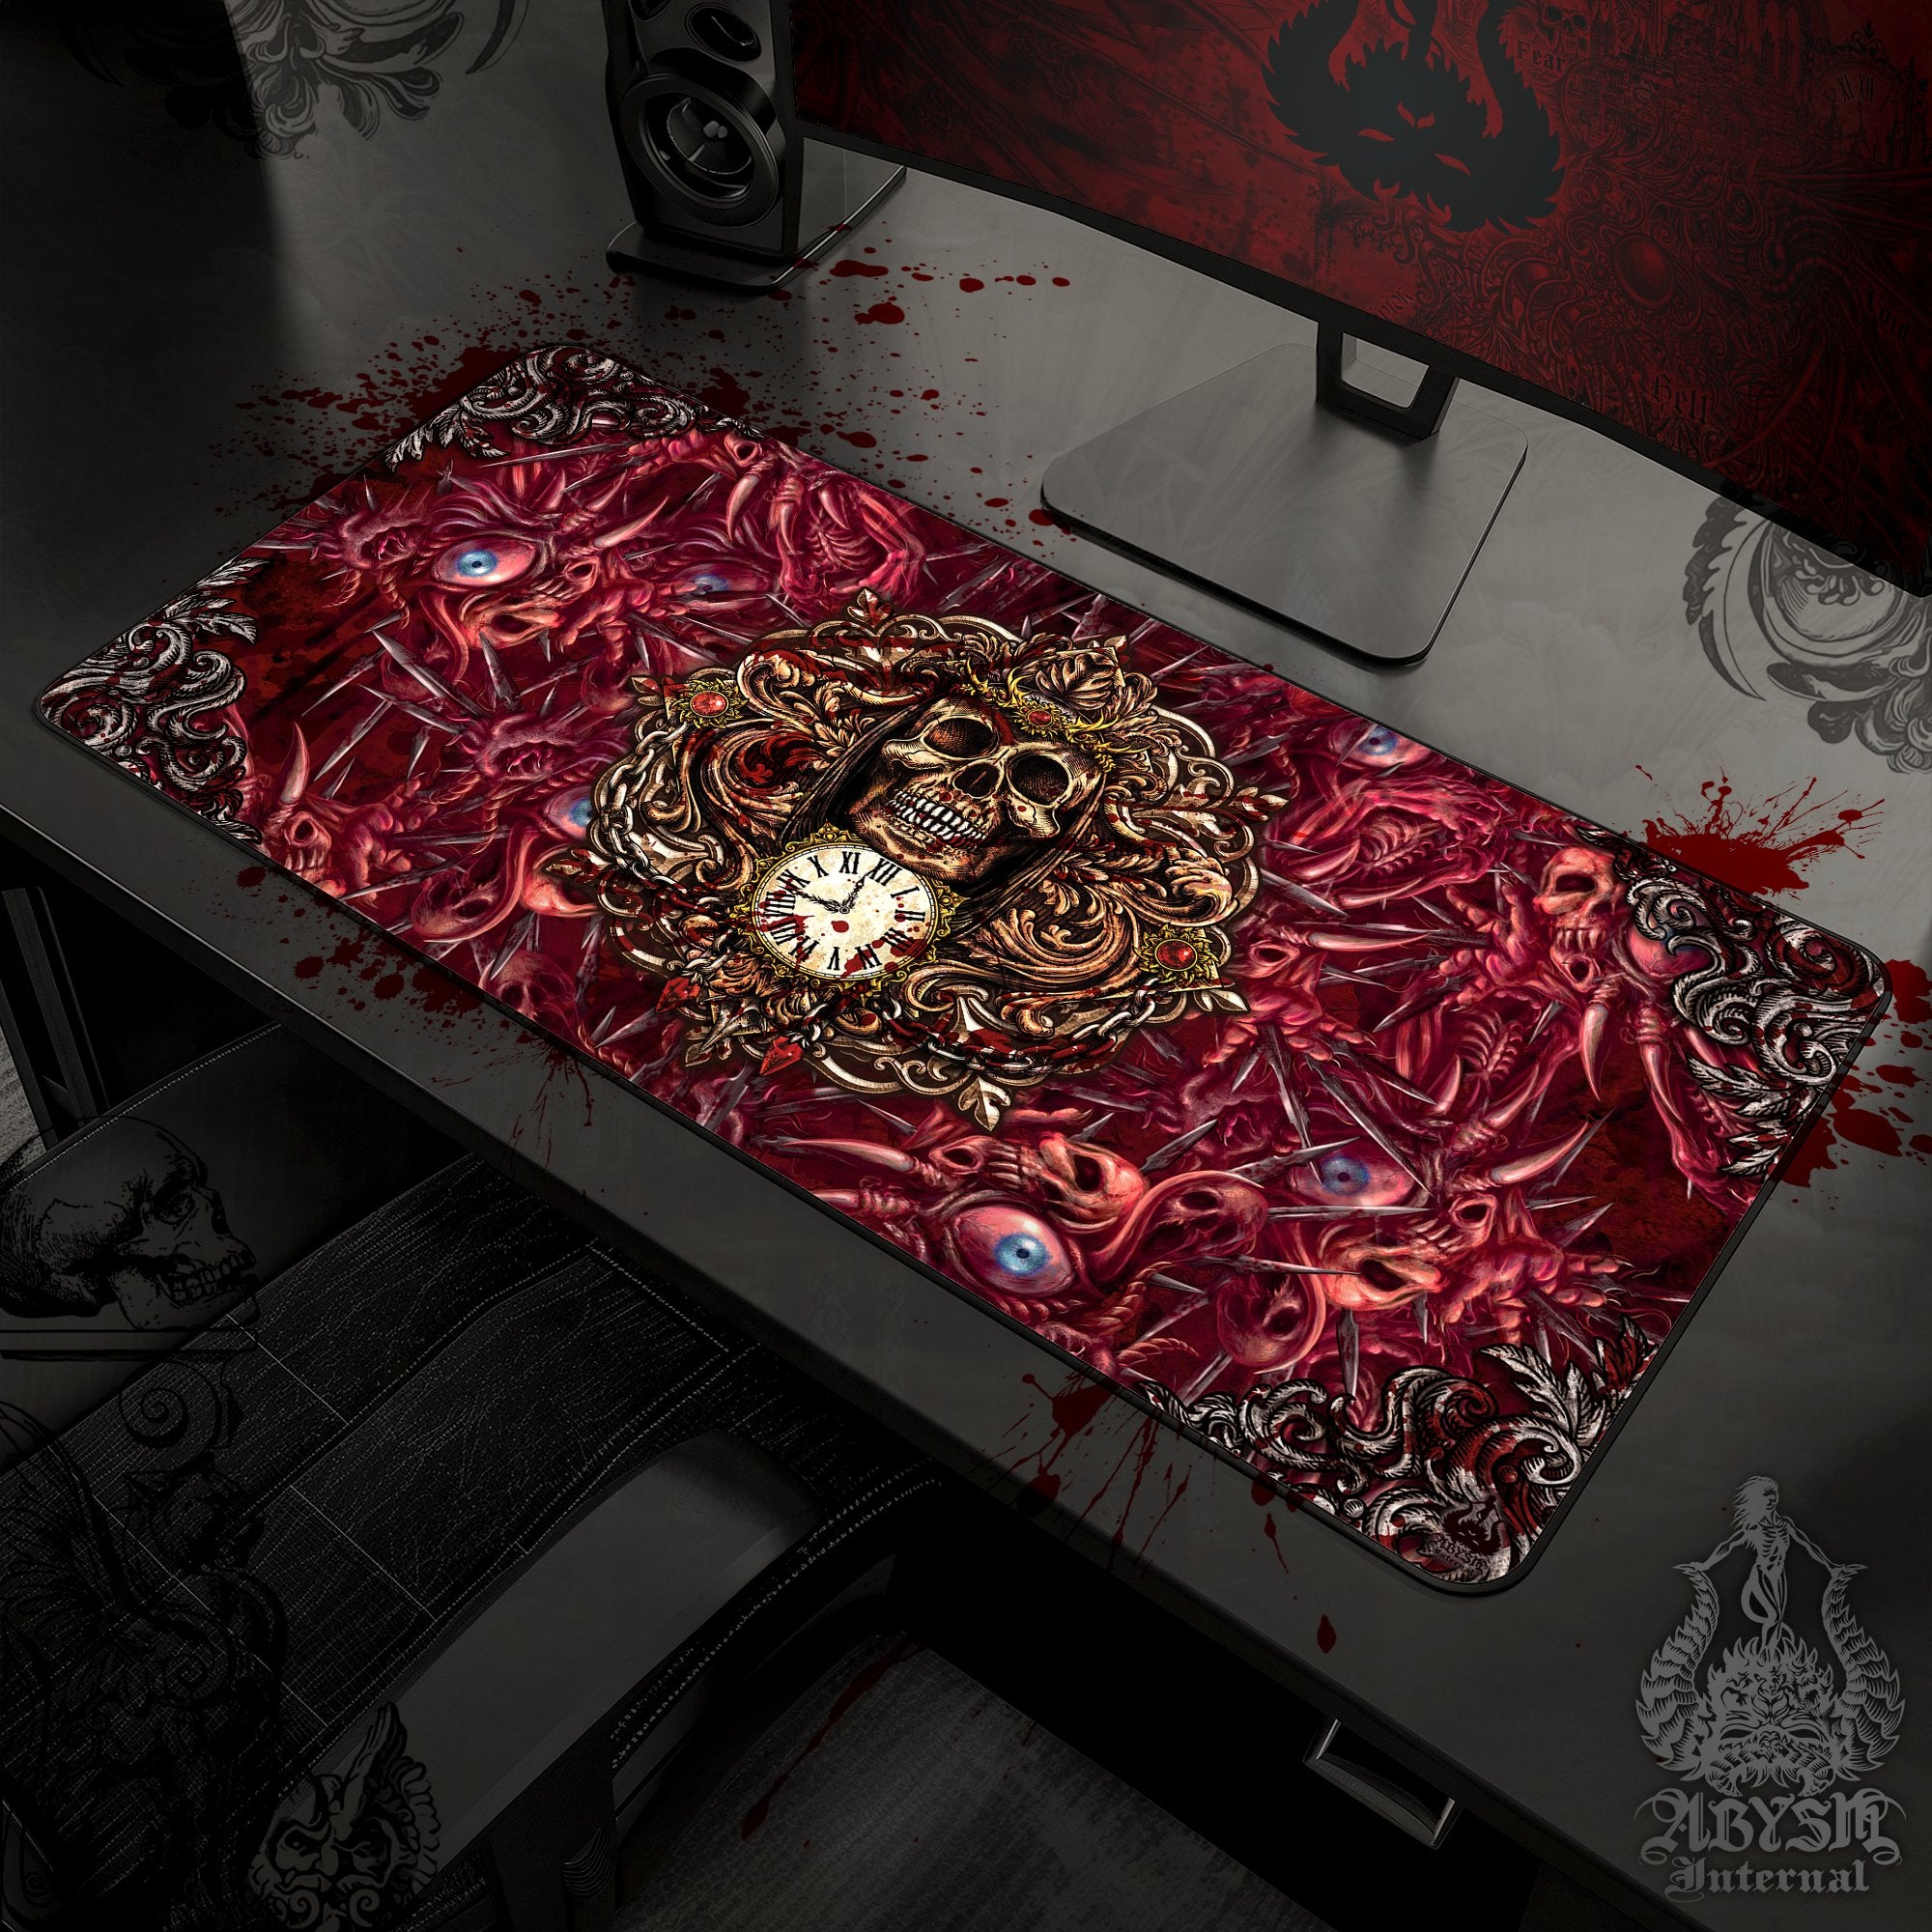 Horror Desk Mat, Grim Reaper Skull Gaming Mouse Pad, Halloween Table Protector Cover, Gore and Blood Workpad, Scary Dark Fantasy Art Print - Abysm Internal